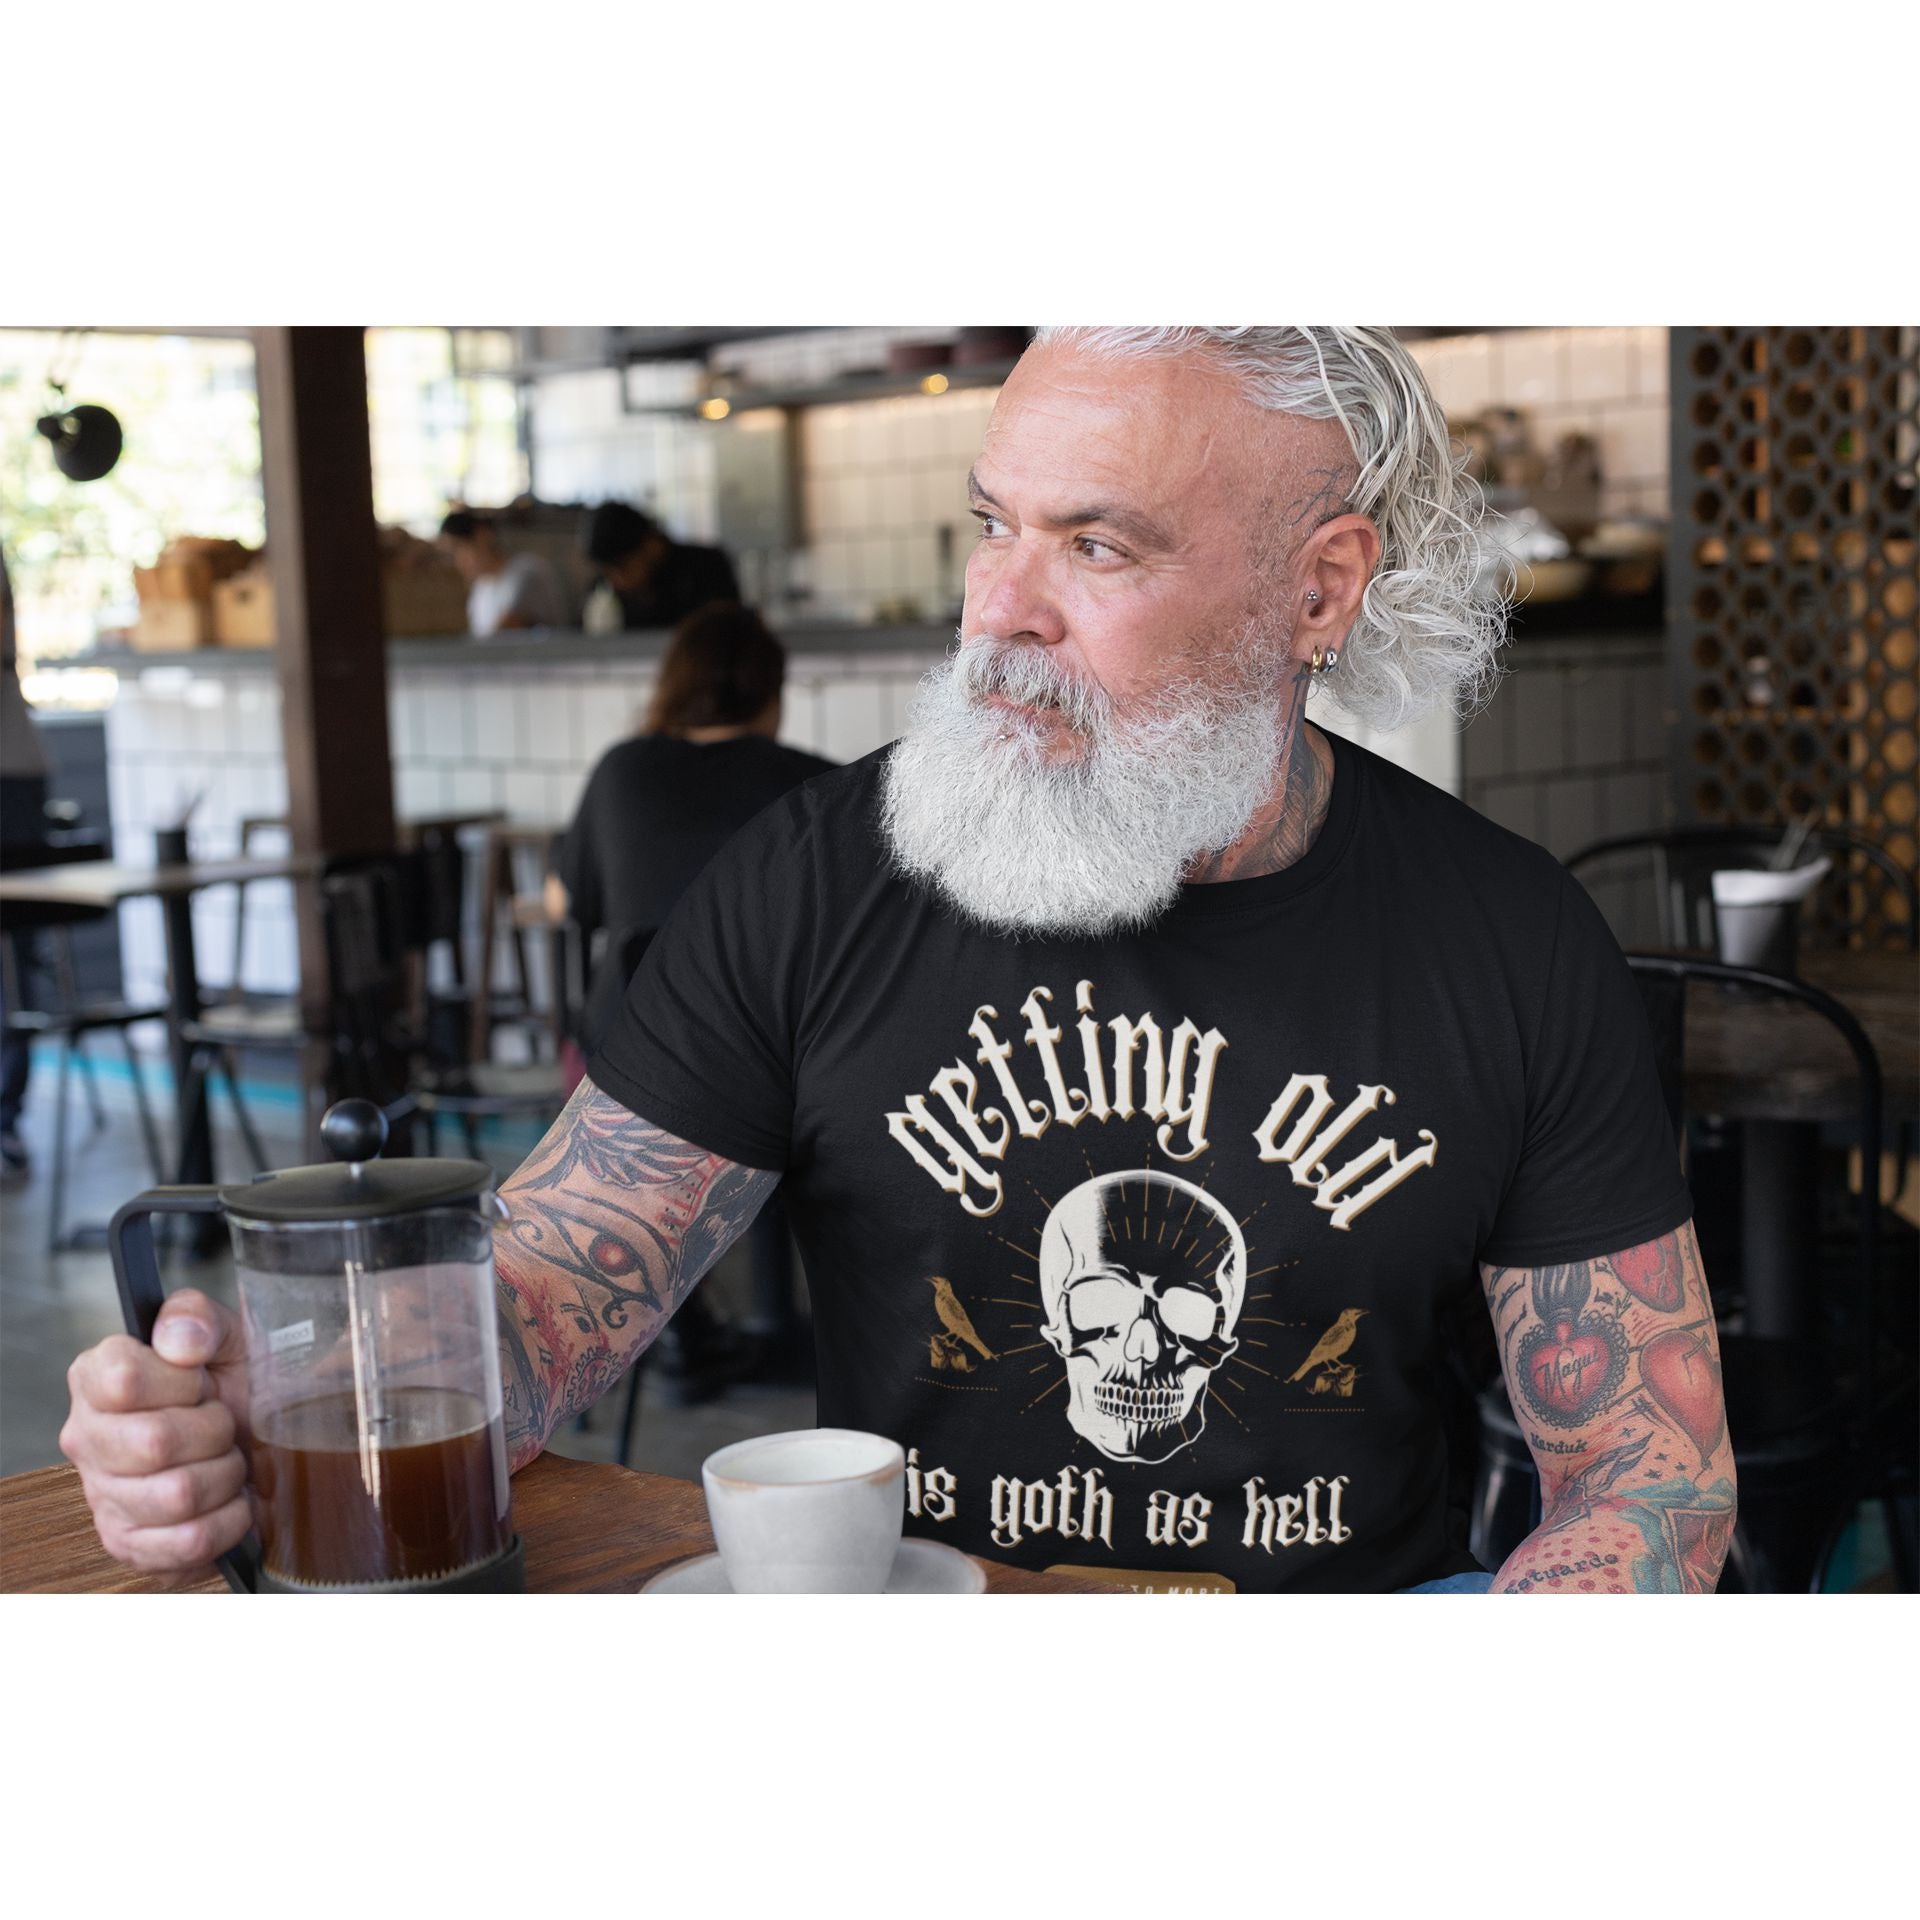 Getting Old is Goth as Hell Vintage Skull Tattoo Heavy Metal Themed Unisex Jersey Short Sleeve Tee